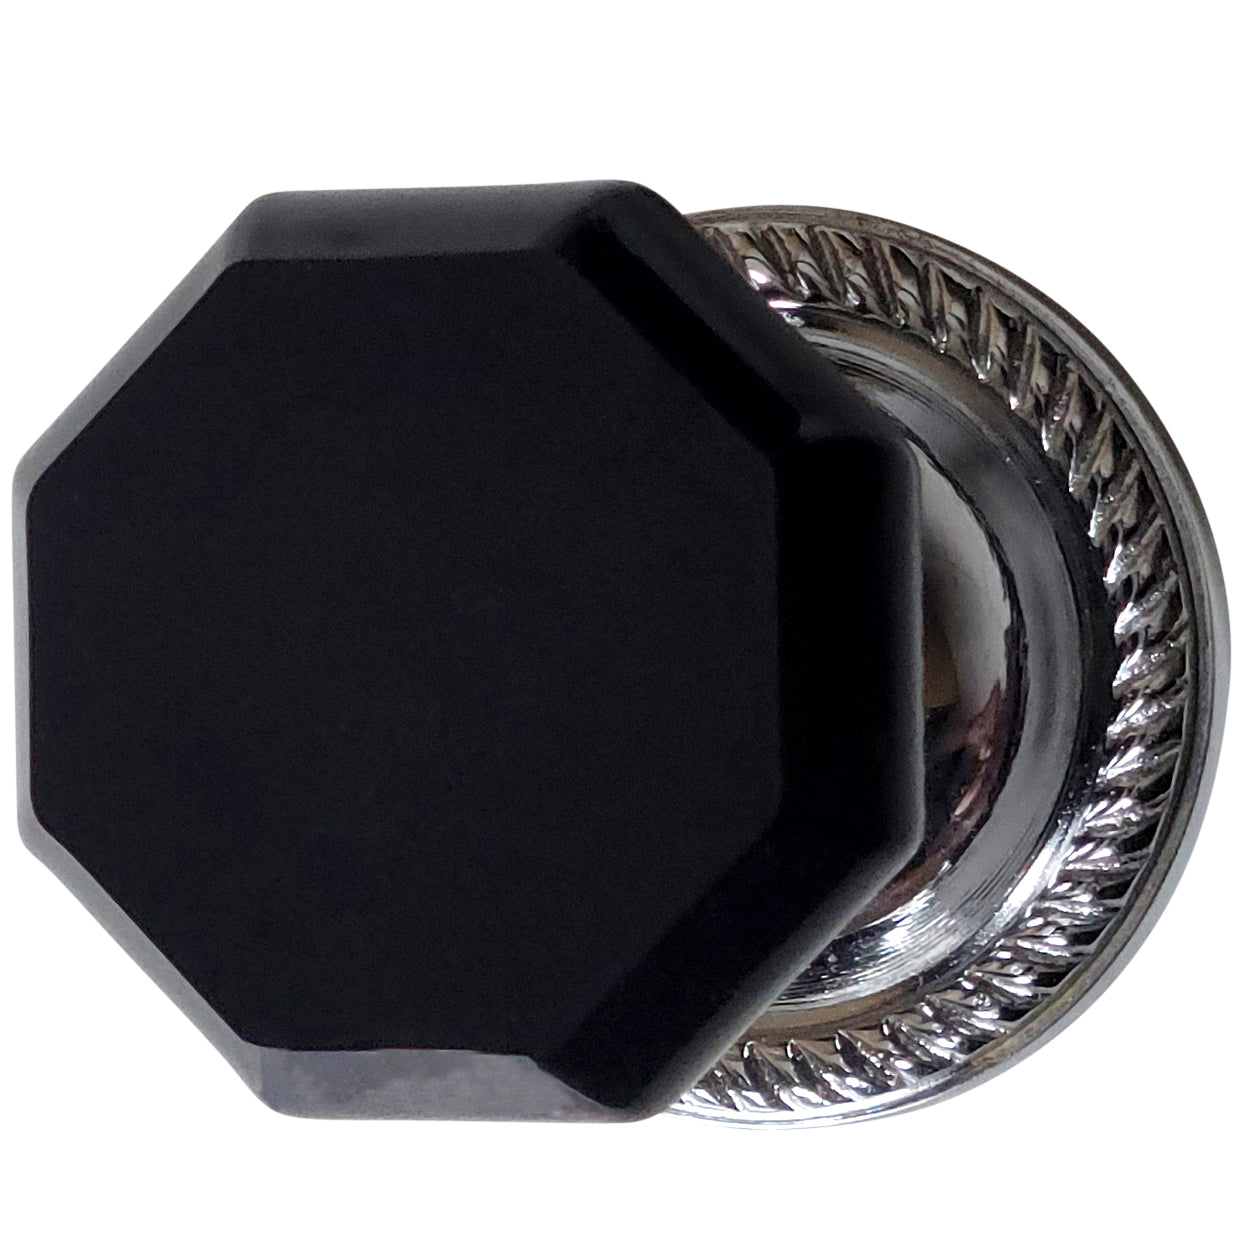 Georgian Roped Rosette with Black Octagon Crystal Door Knobs (Several Finishes Available)